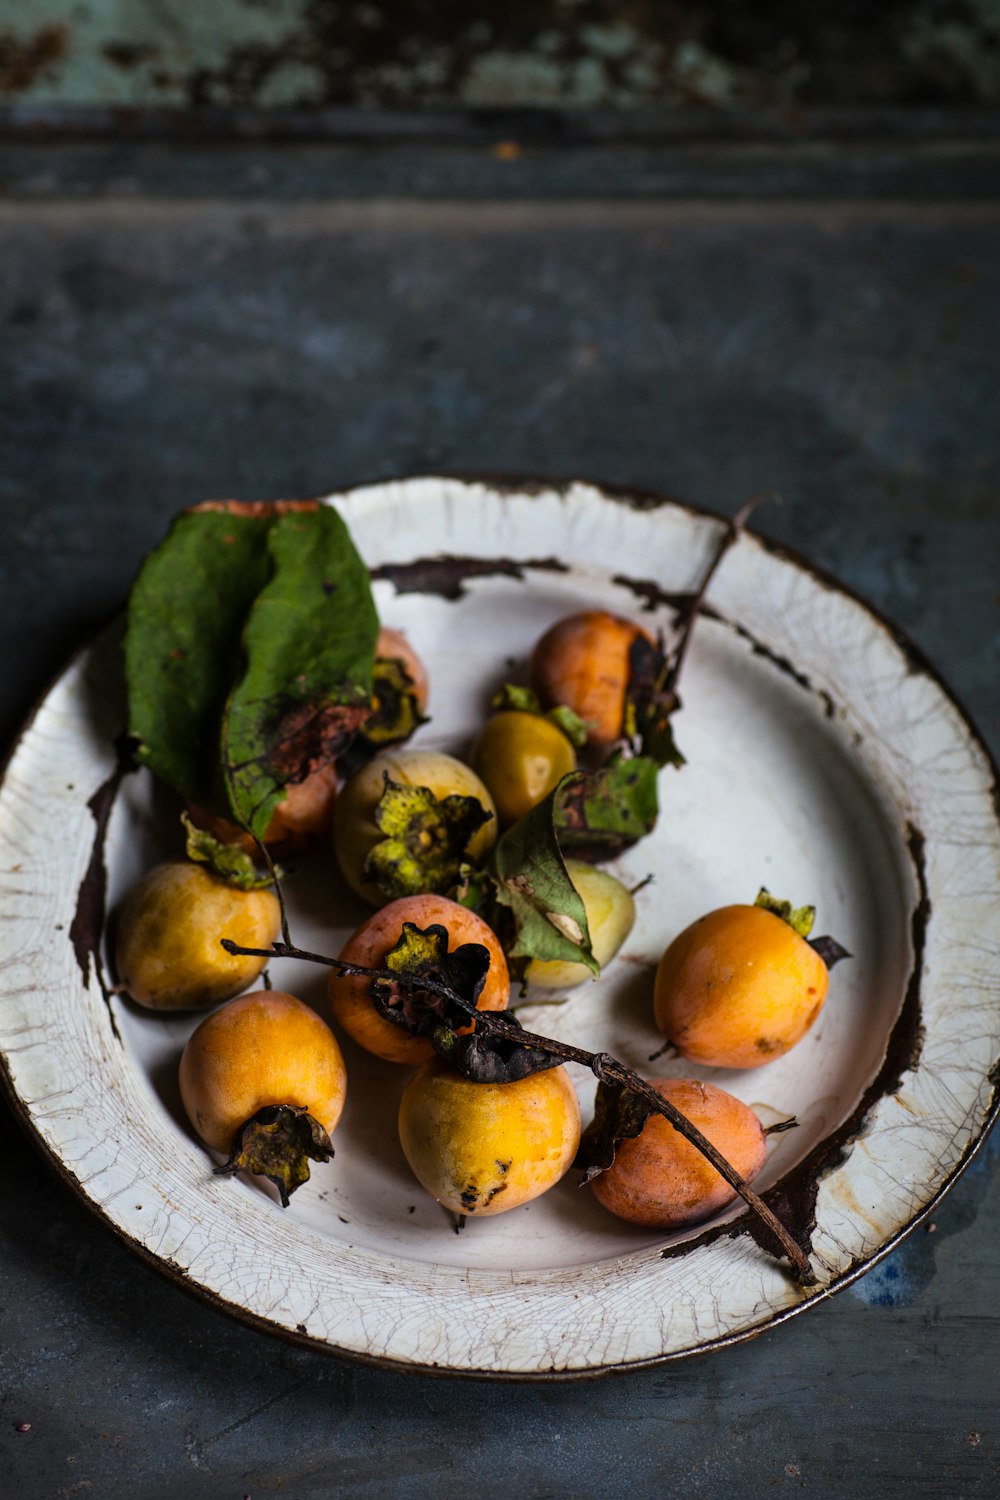 round yellow fruits on ceramic plate